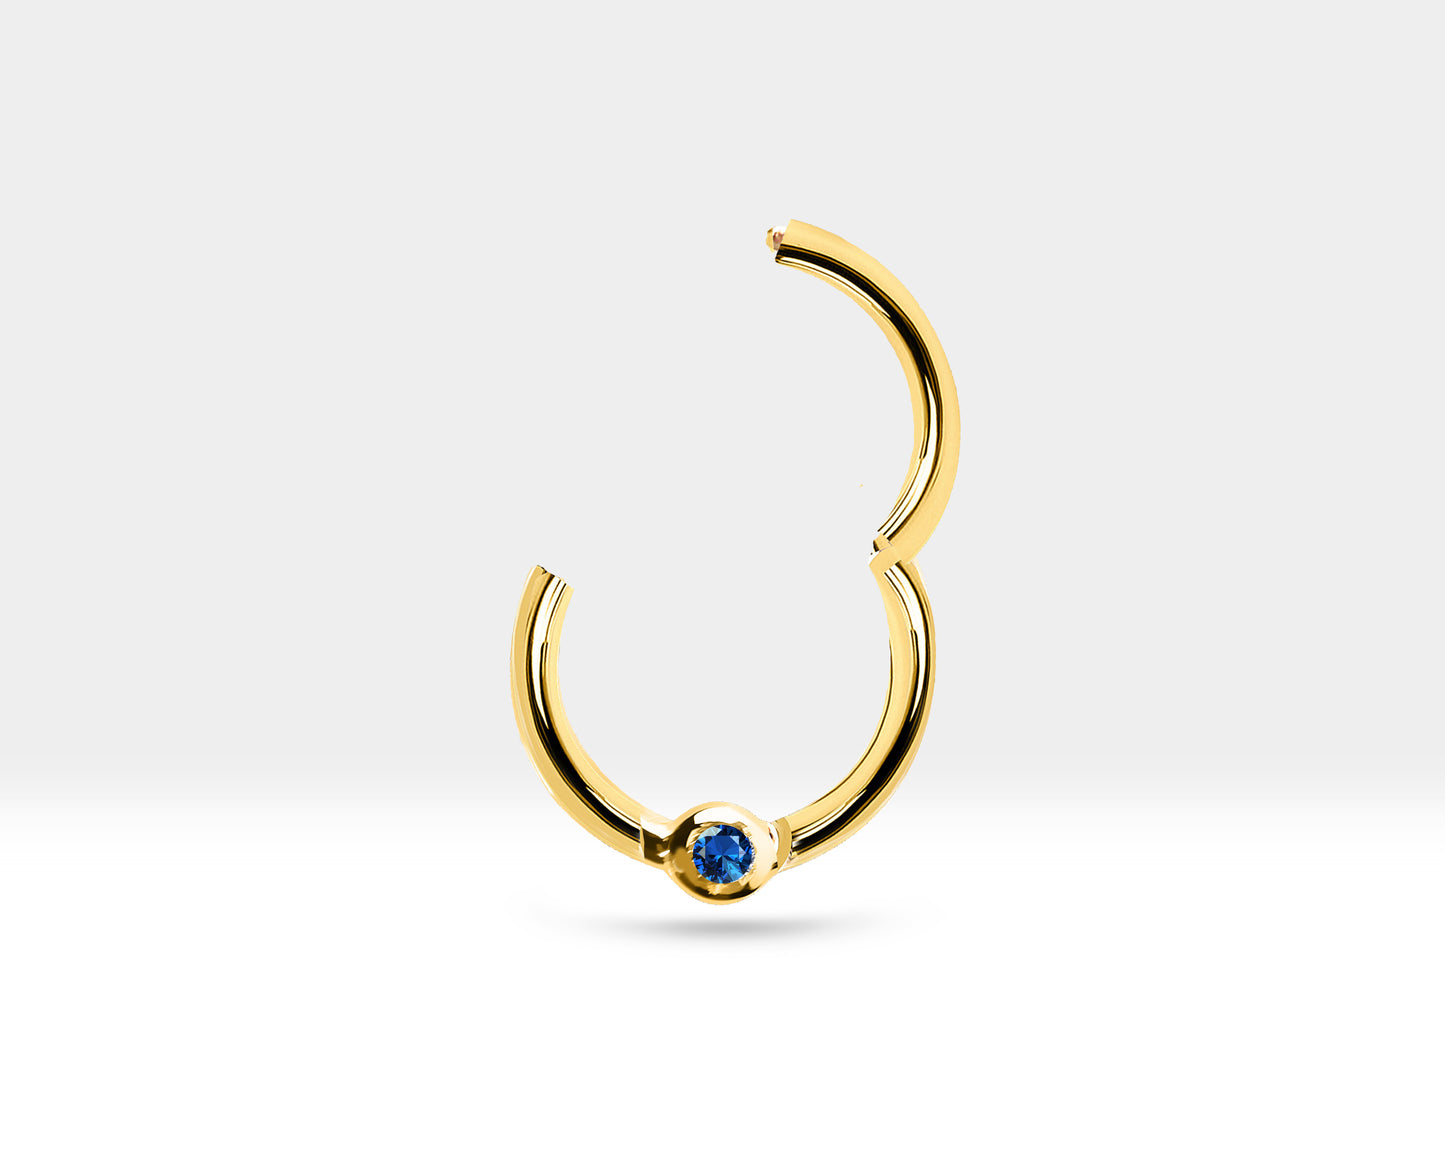 Cartilage Hoop with Round Cut Sapphire Clicker Single Earring in 14K Yellow Solid Gold 18G